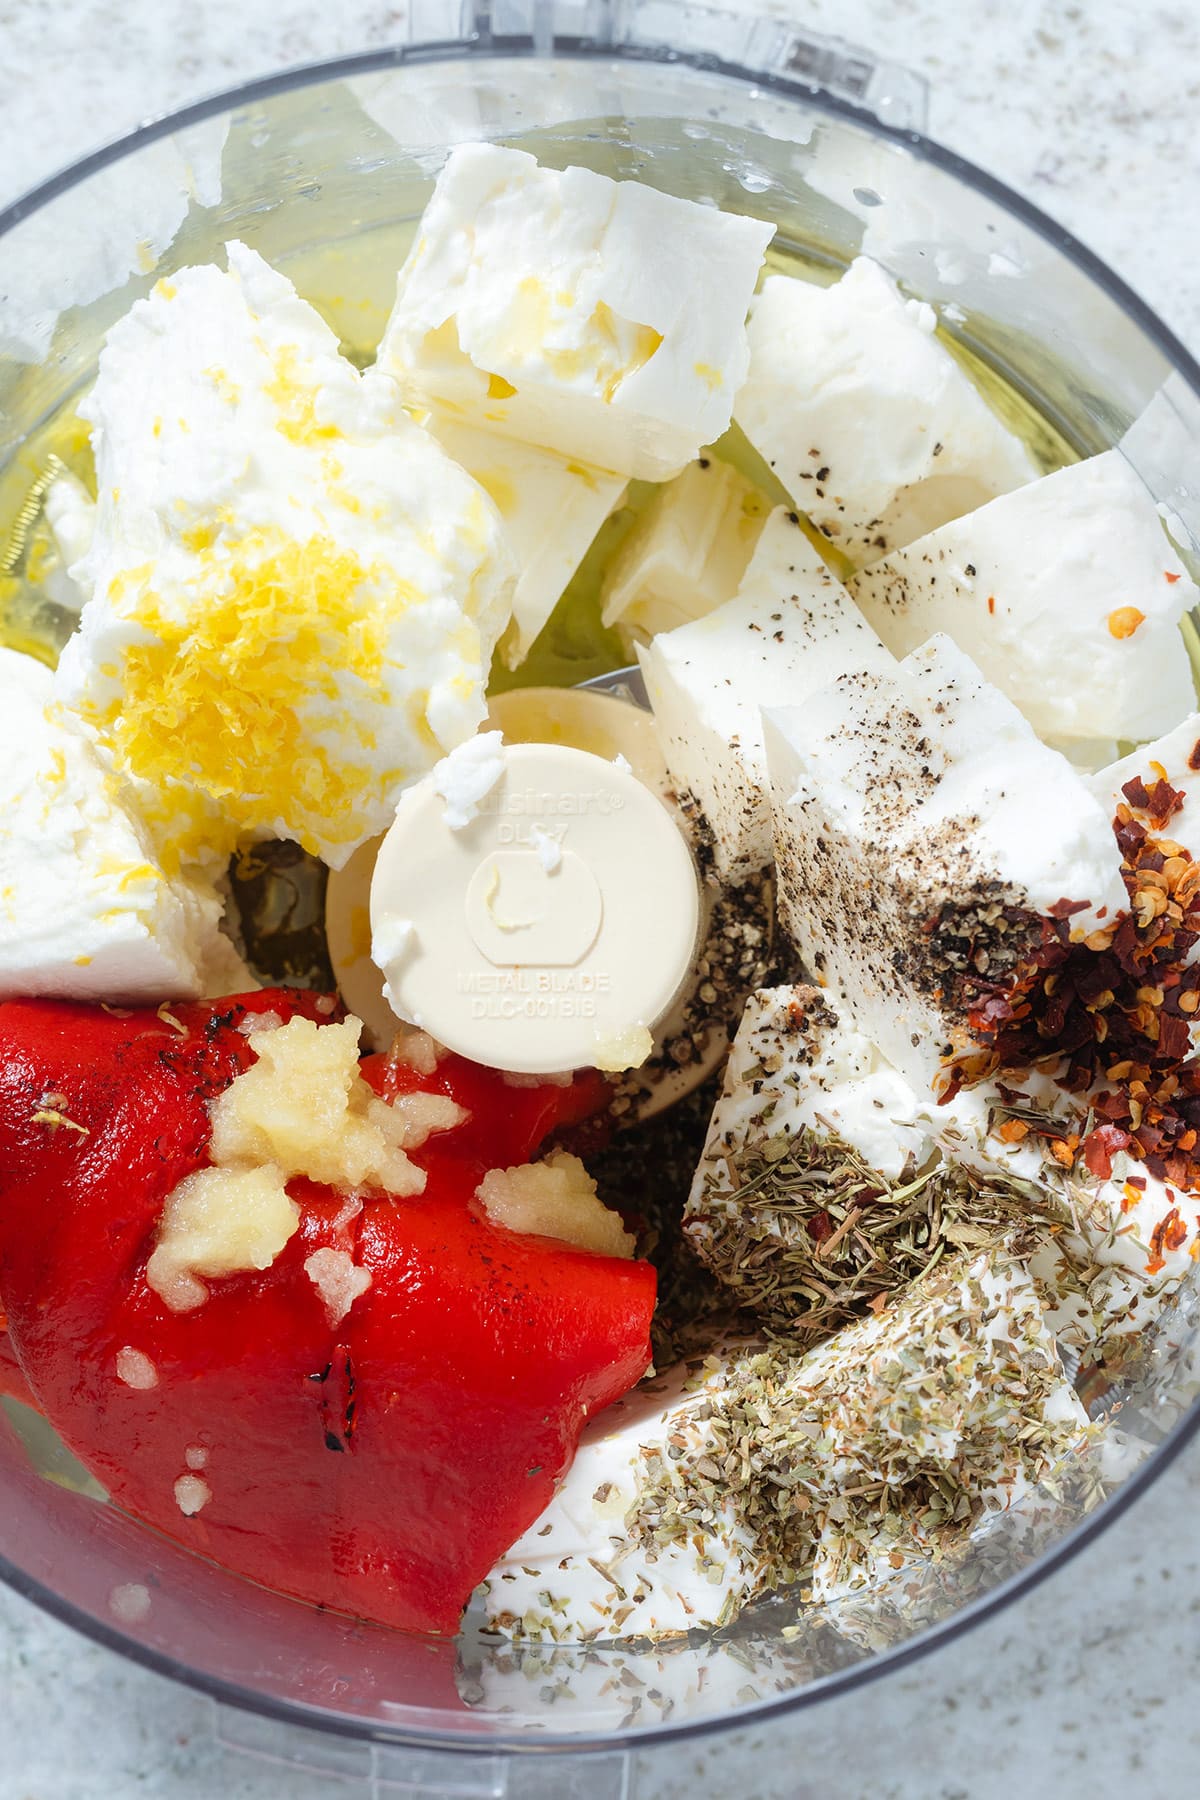 Feta, goat cheese, roasted red pepper, and other ingredients in a food processor.